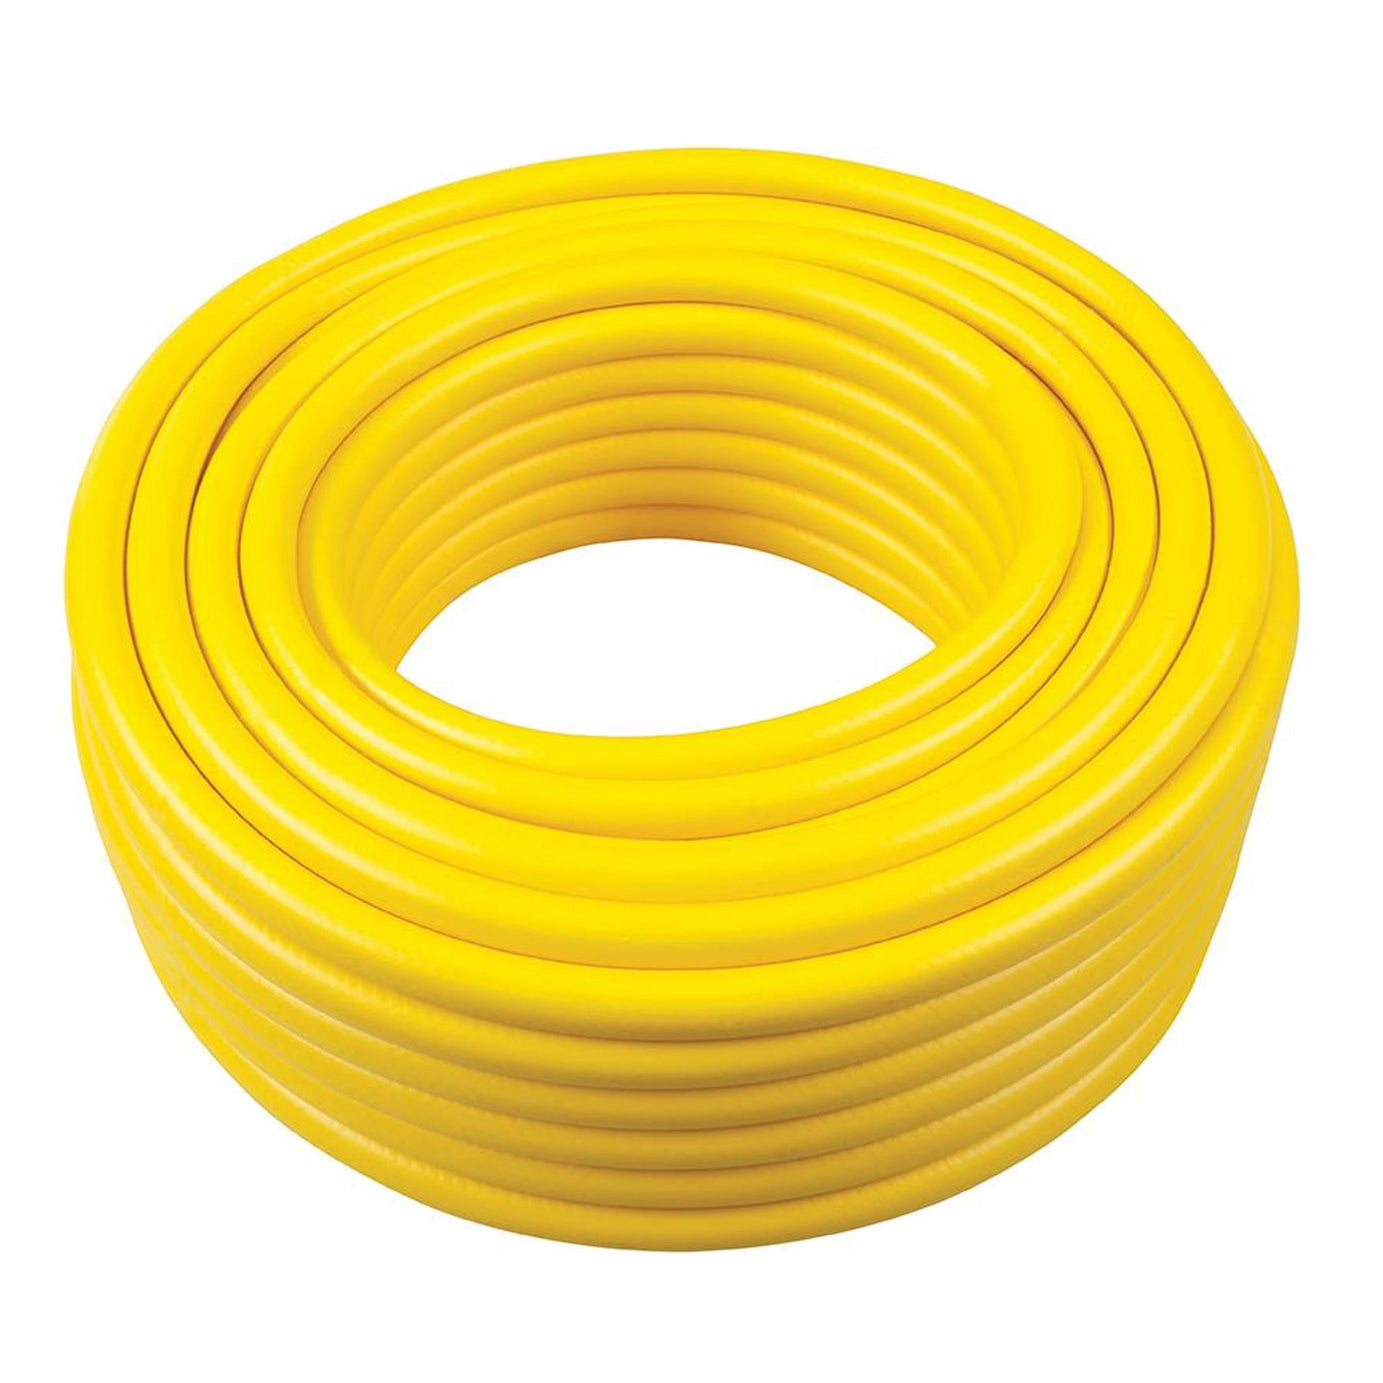 Reinforced Yellow Braided Flexible PVC Hose Pipe 30m for Water Air Oil Gases